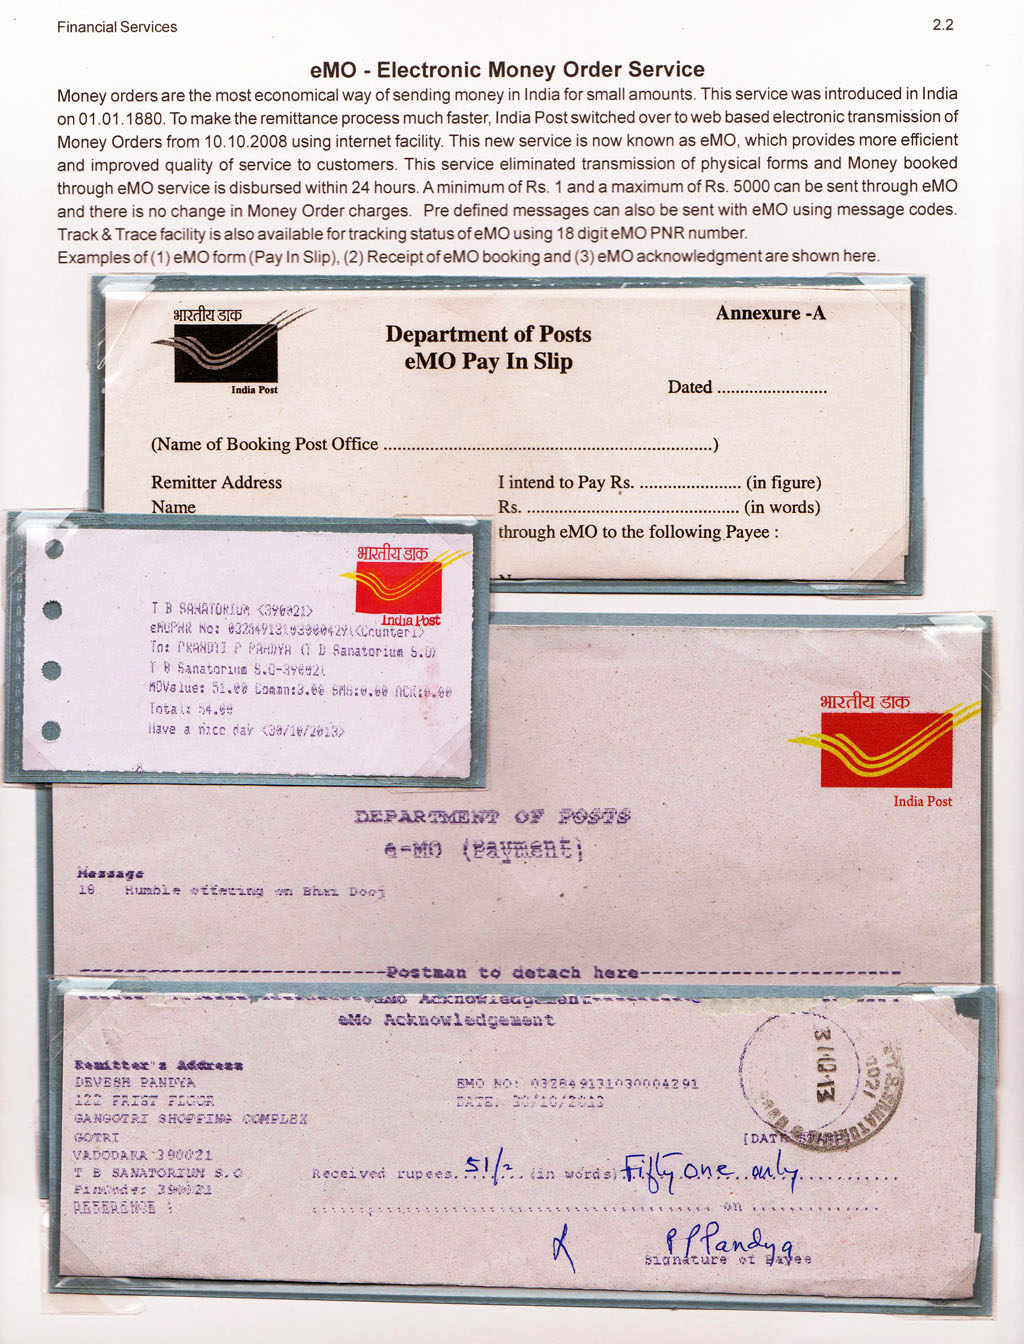 Glimpses of innovations in 21st Century Indian Postal Services